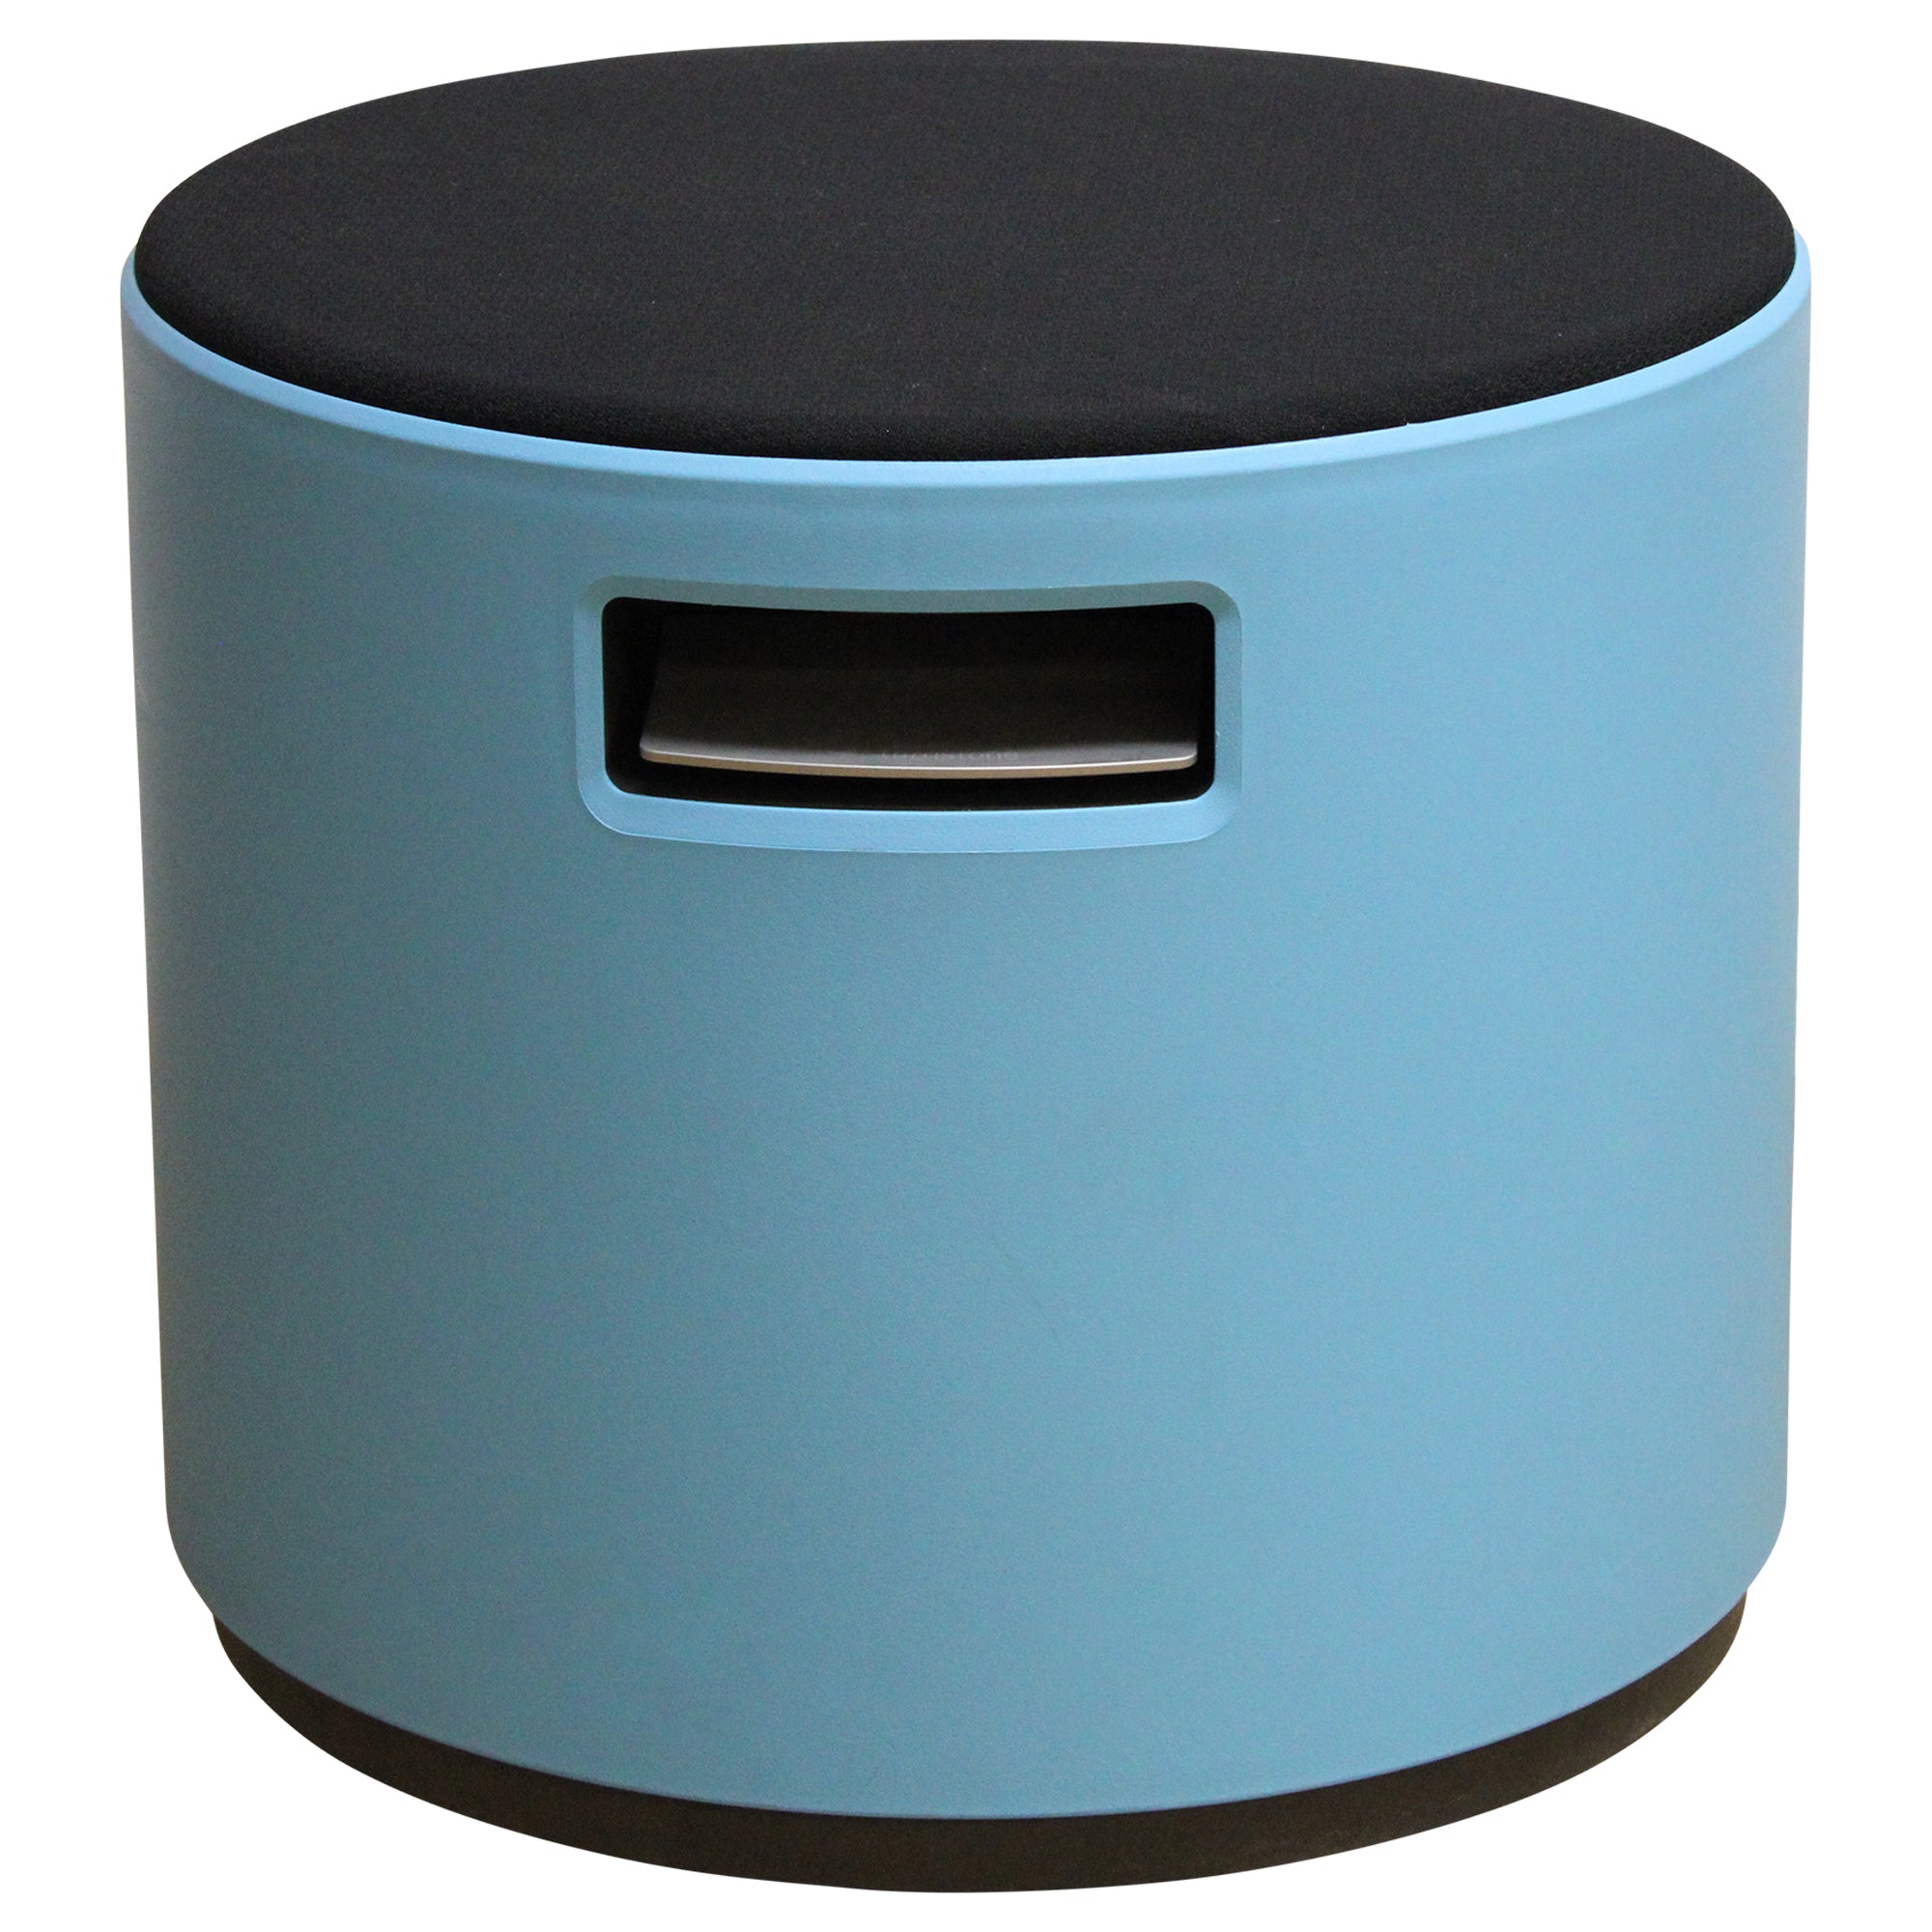 Turnstone Buoy Multifunctional Ottoman - Blue - Preowned